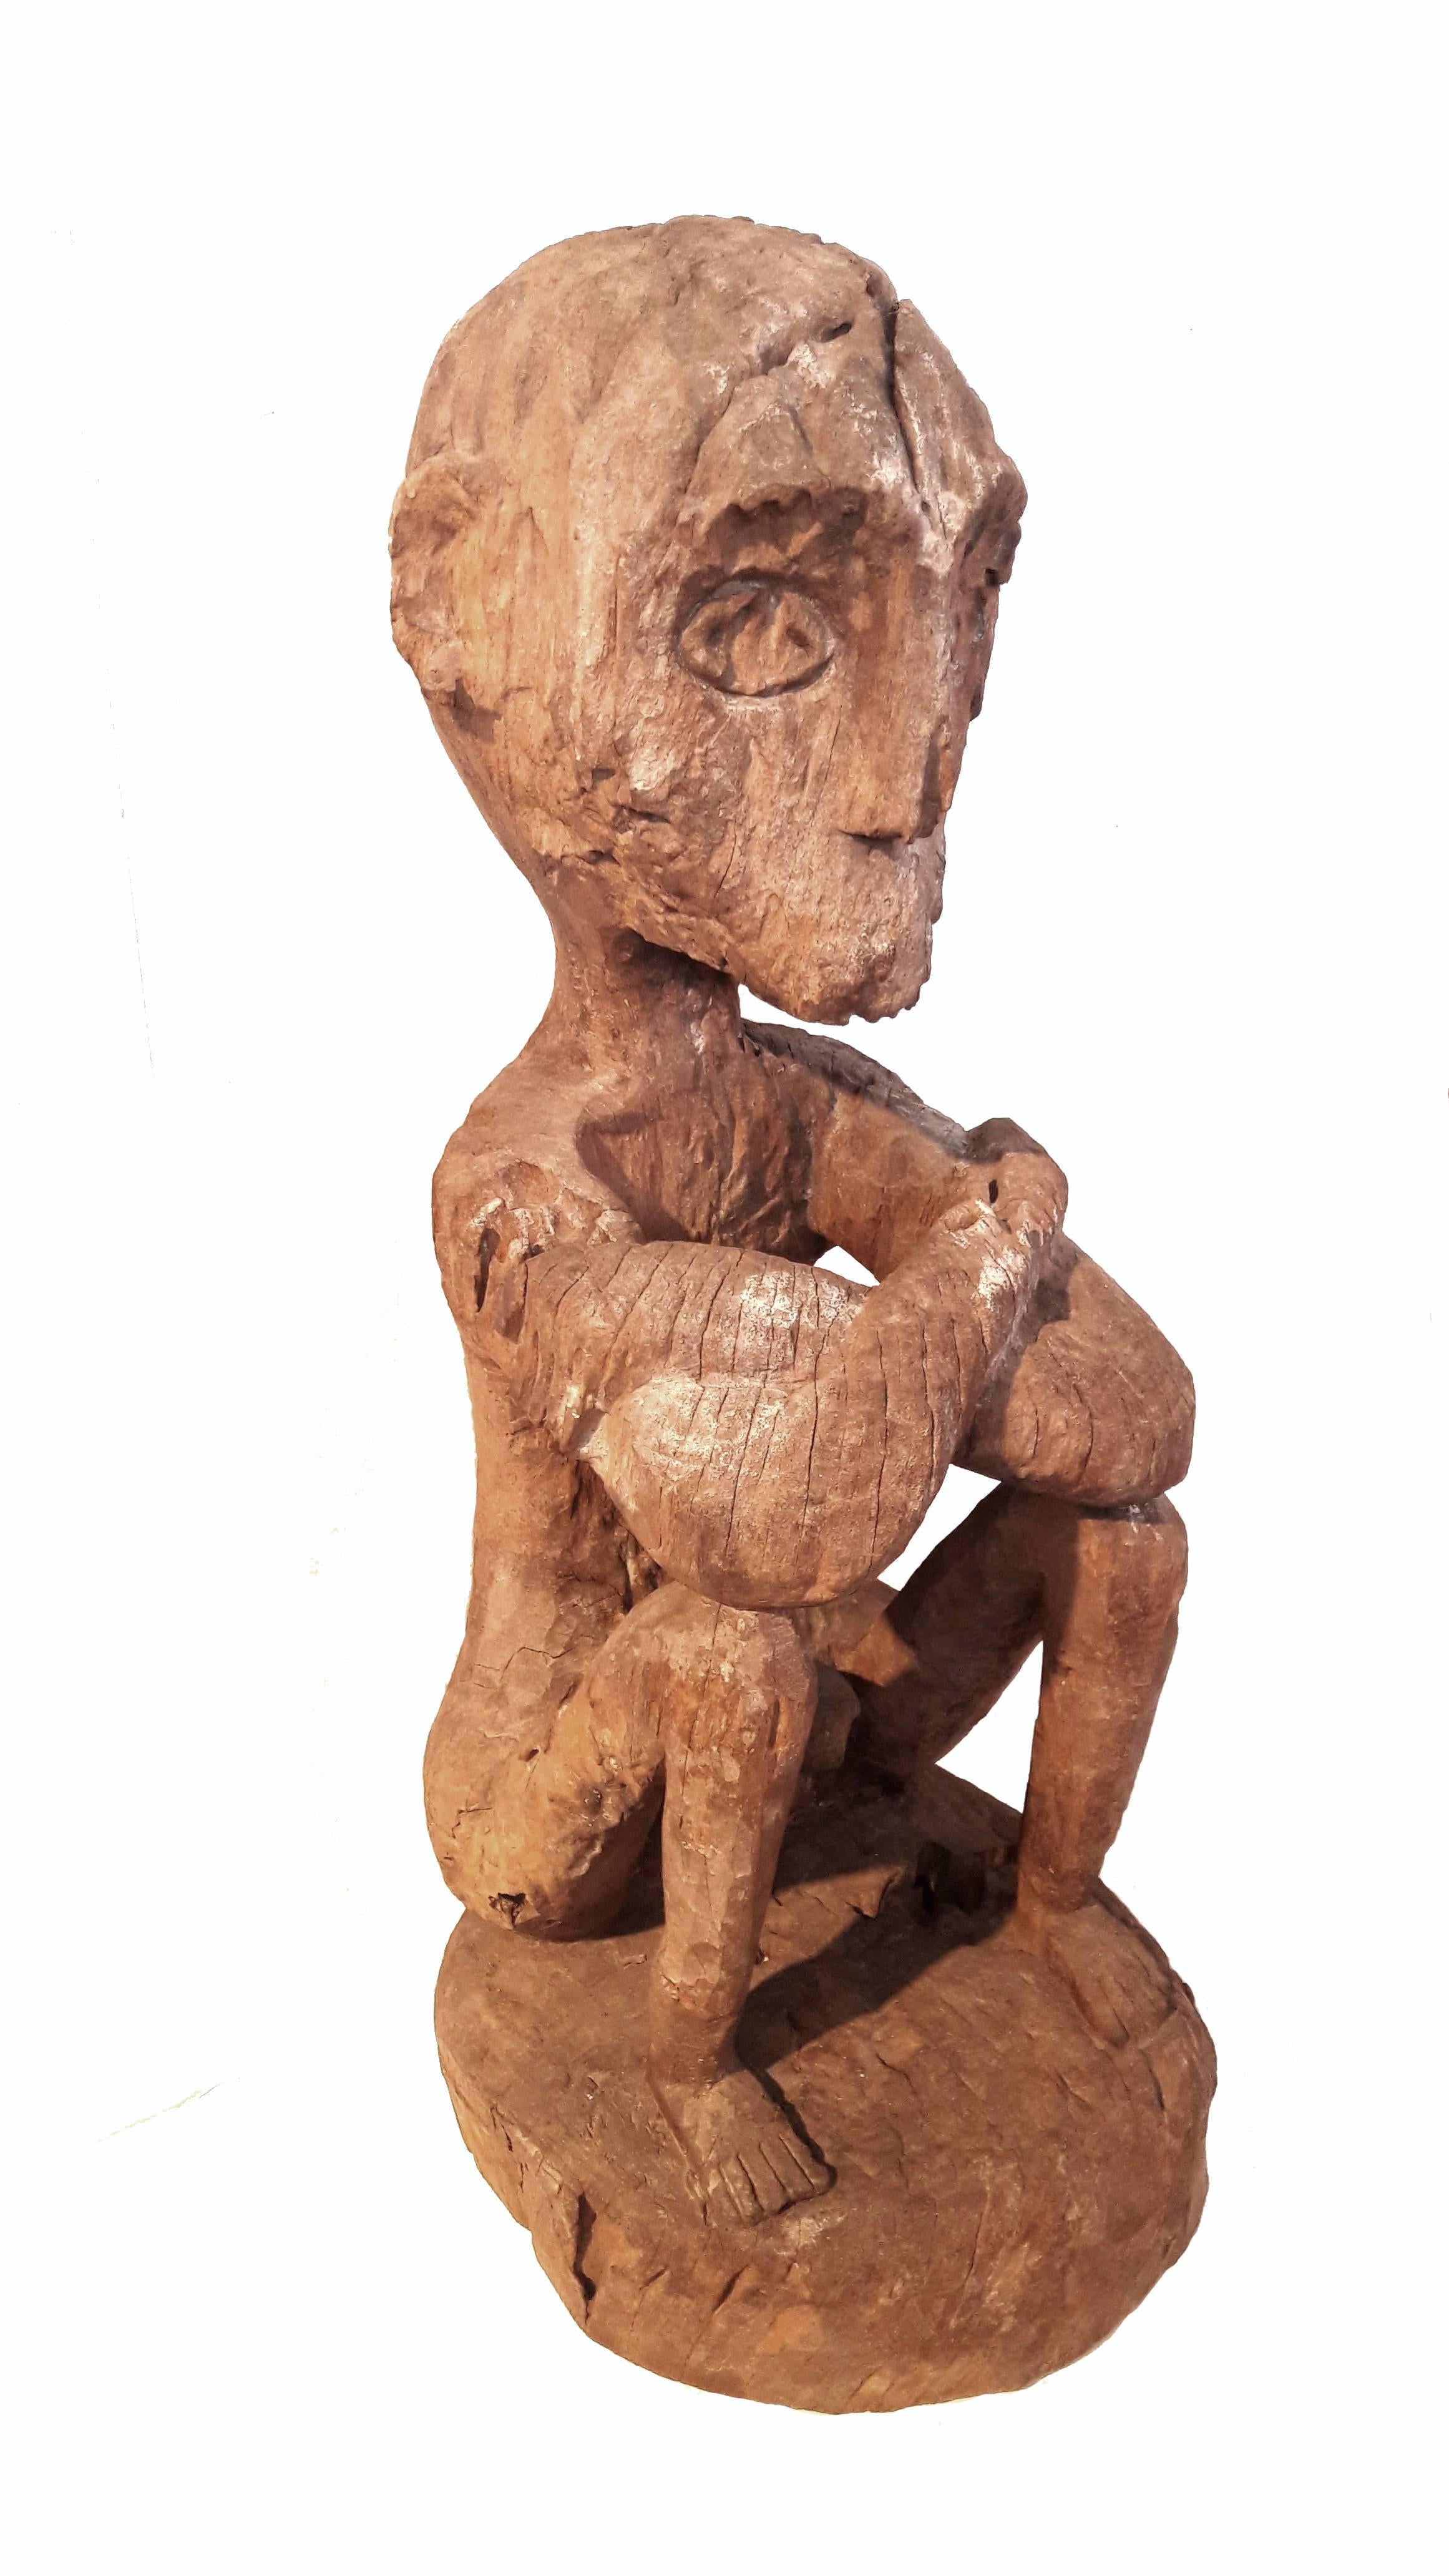 Hand-Carved Early 20th Century Benu'aq Tribe Sculpture from Borneo